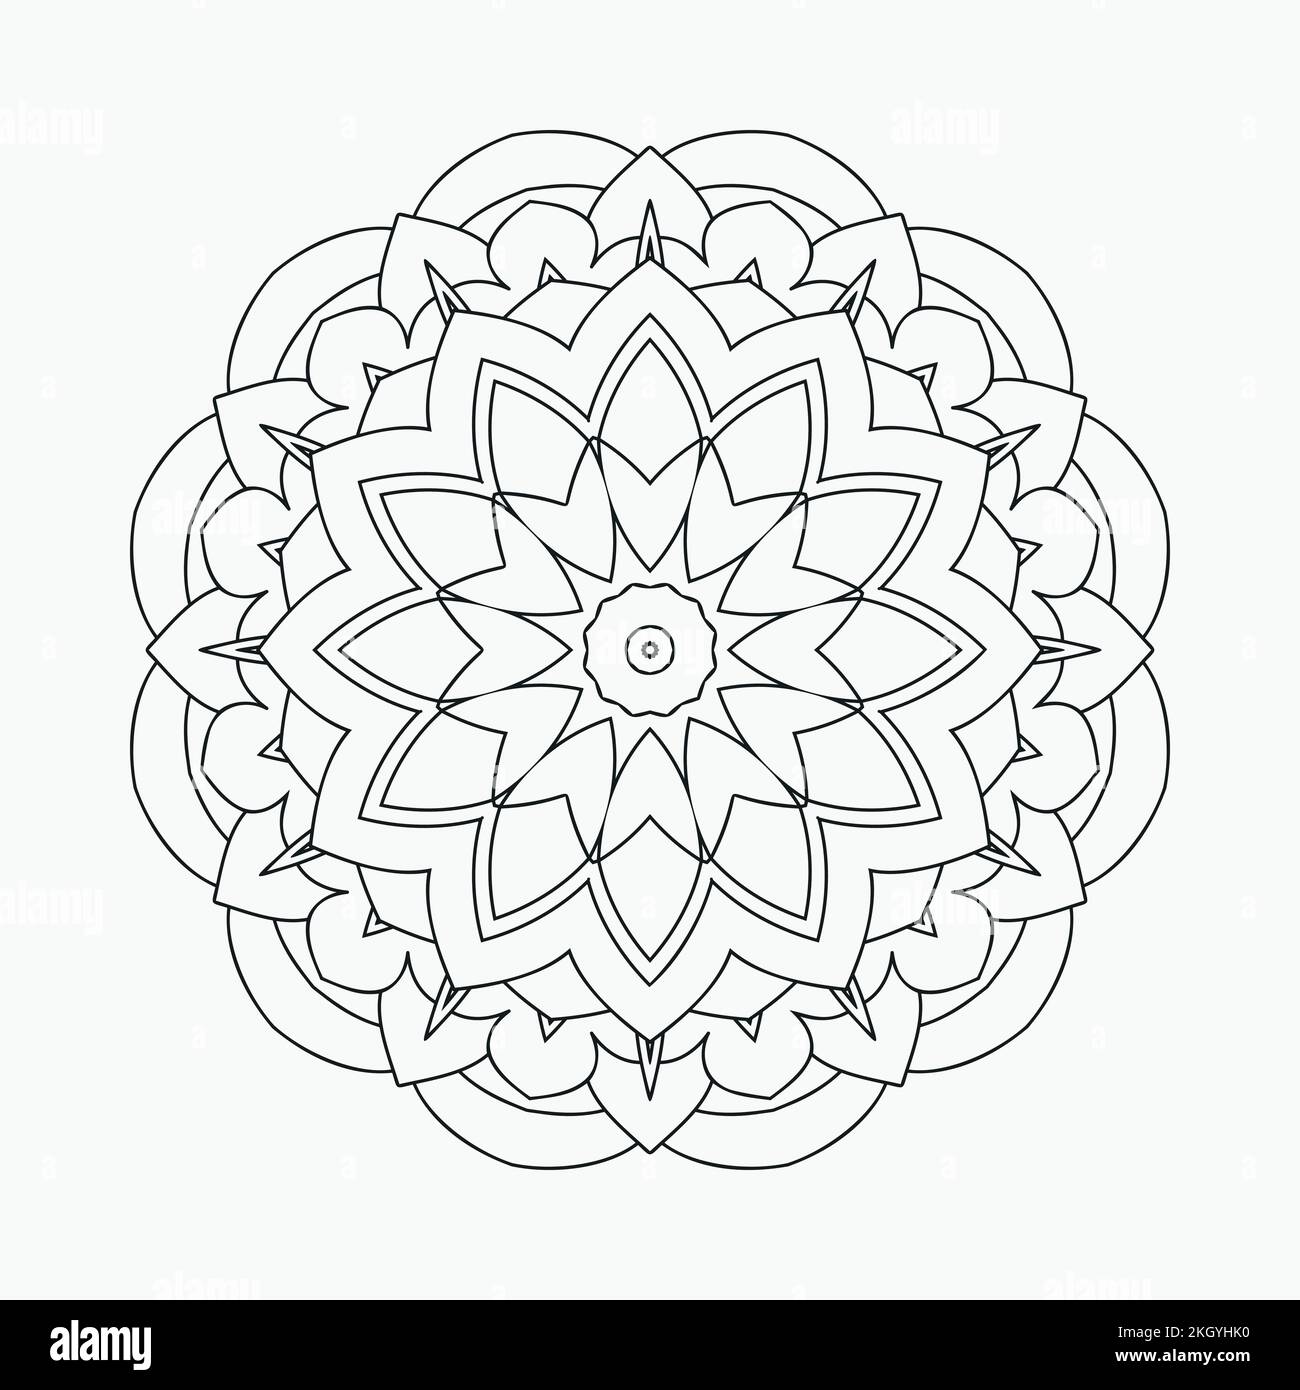 Decorative mandala pattern in Indian style. Kids coloring page. Doodle mandala on a white background. Traditional Indian mandala for coloring pages. C Stock Vector